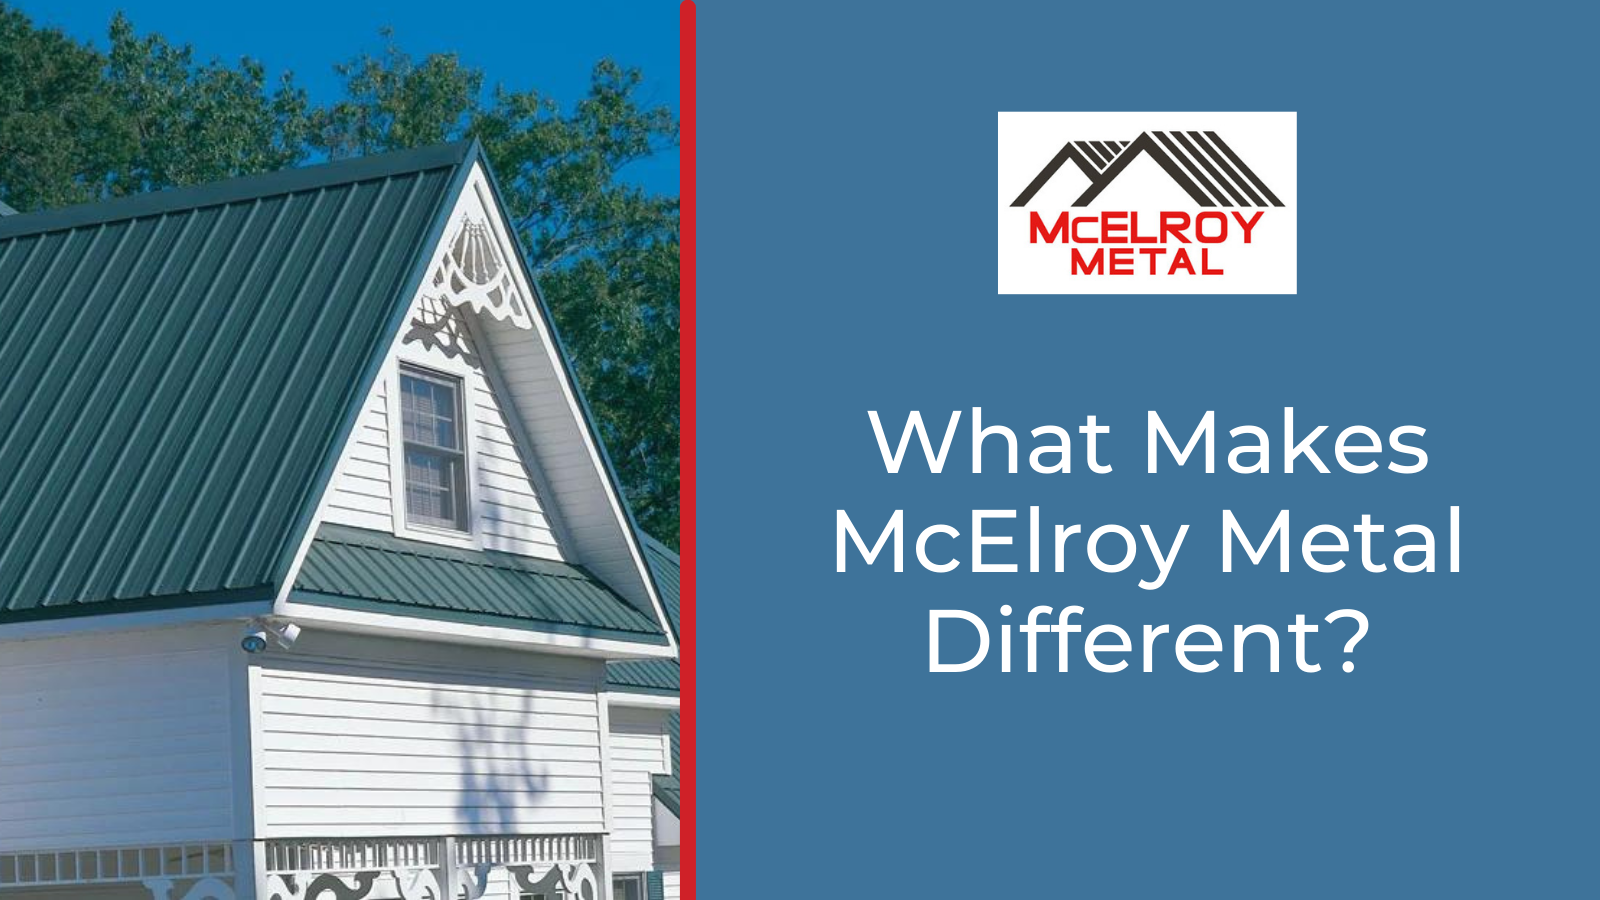 What Makes McElroy Metal Different?